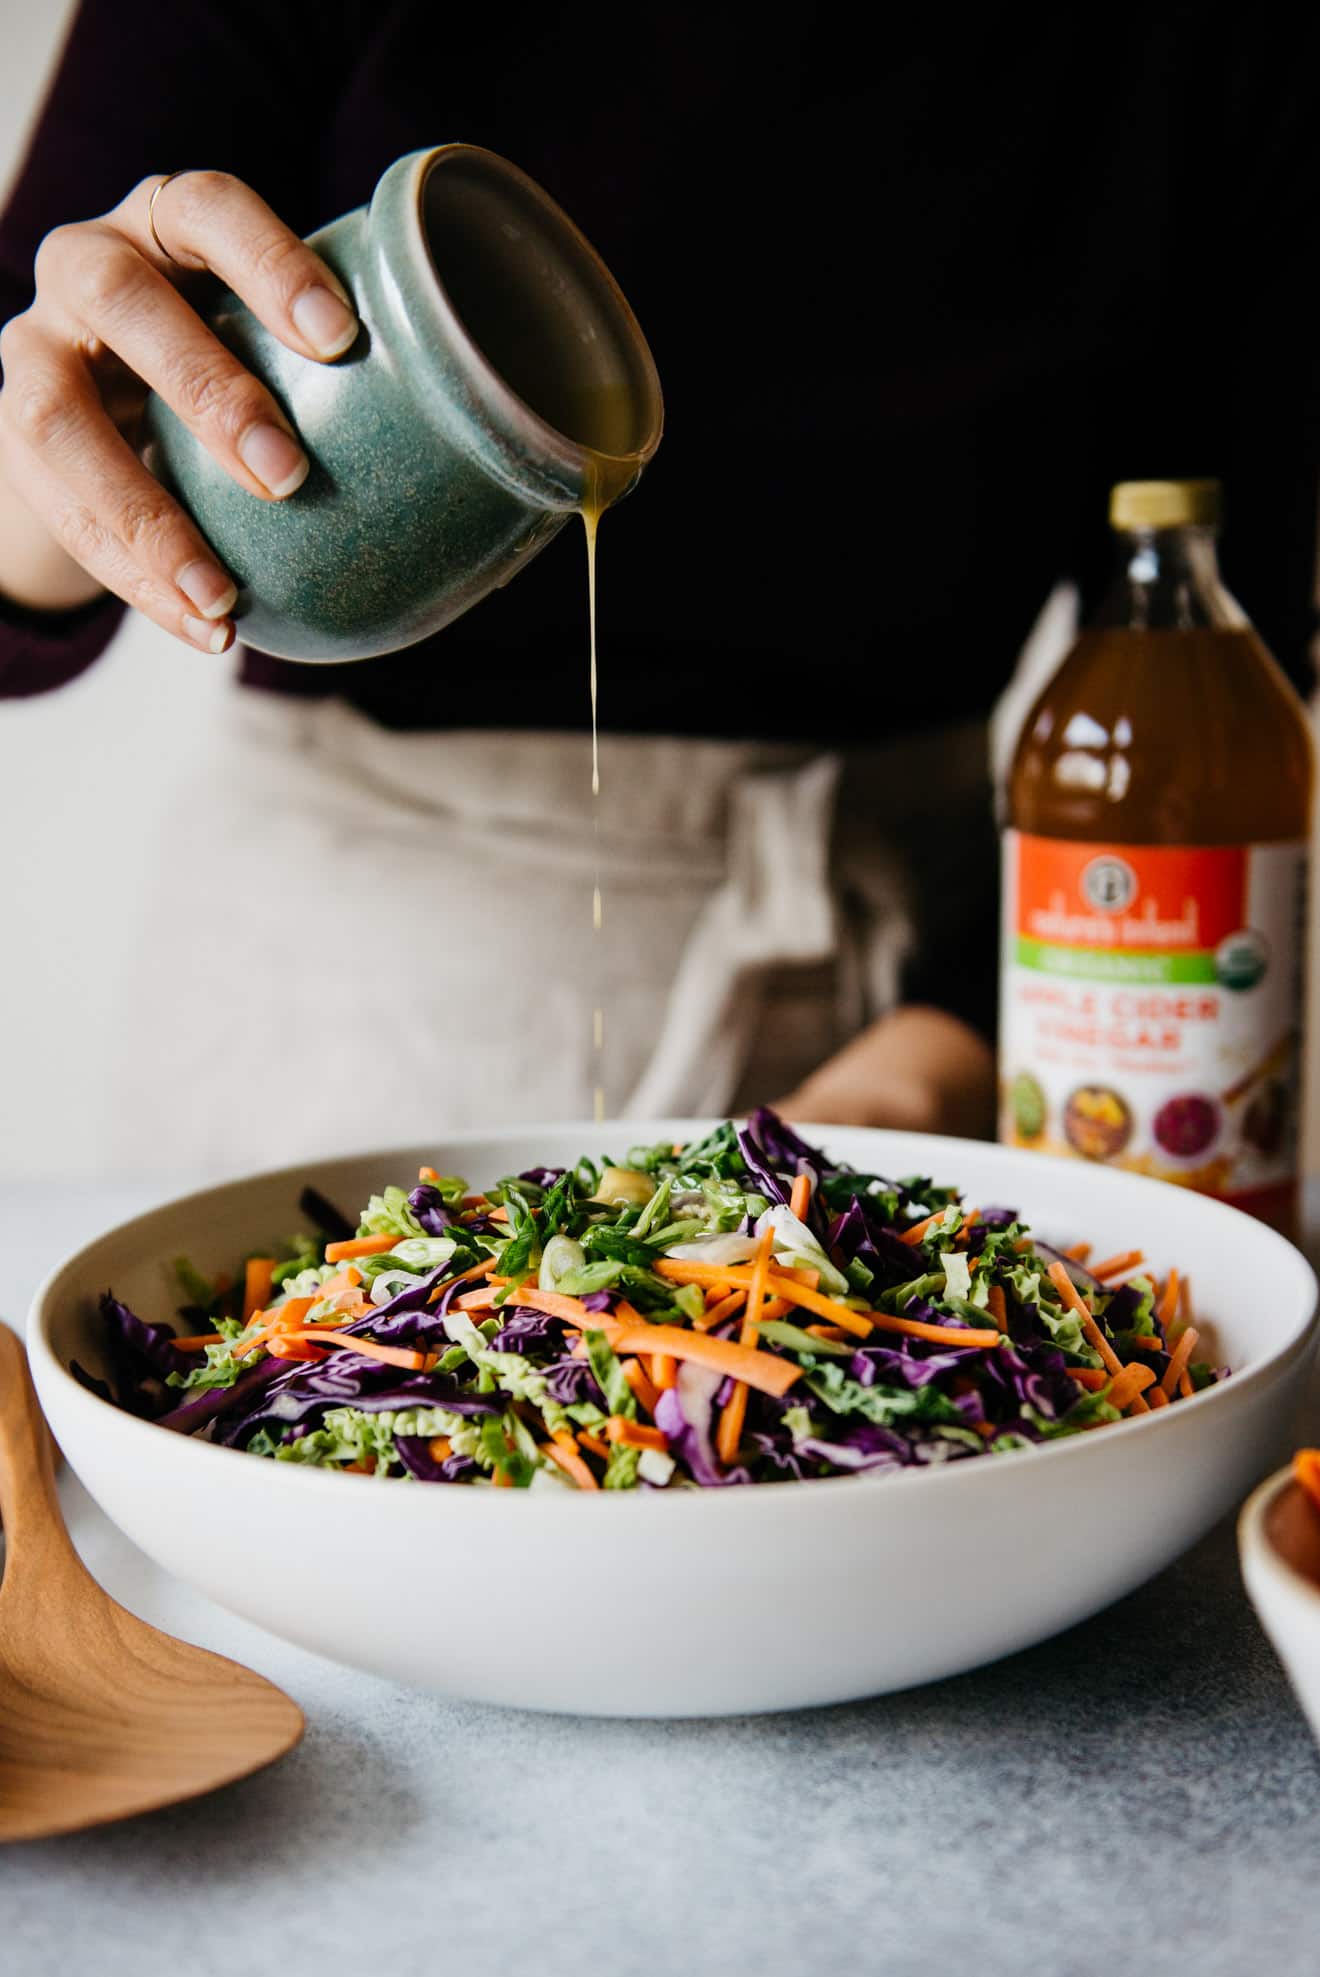 Cabbage and Carrot Slaw with Almond Butter Vinaigrette #vegan #glutenfree #healthy